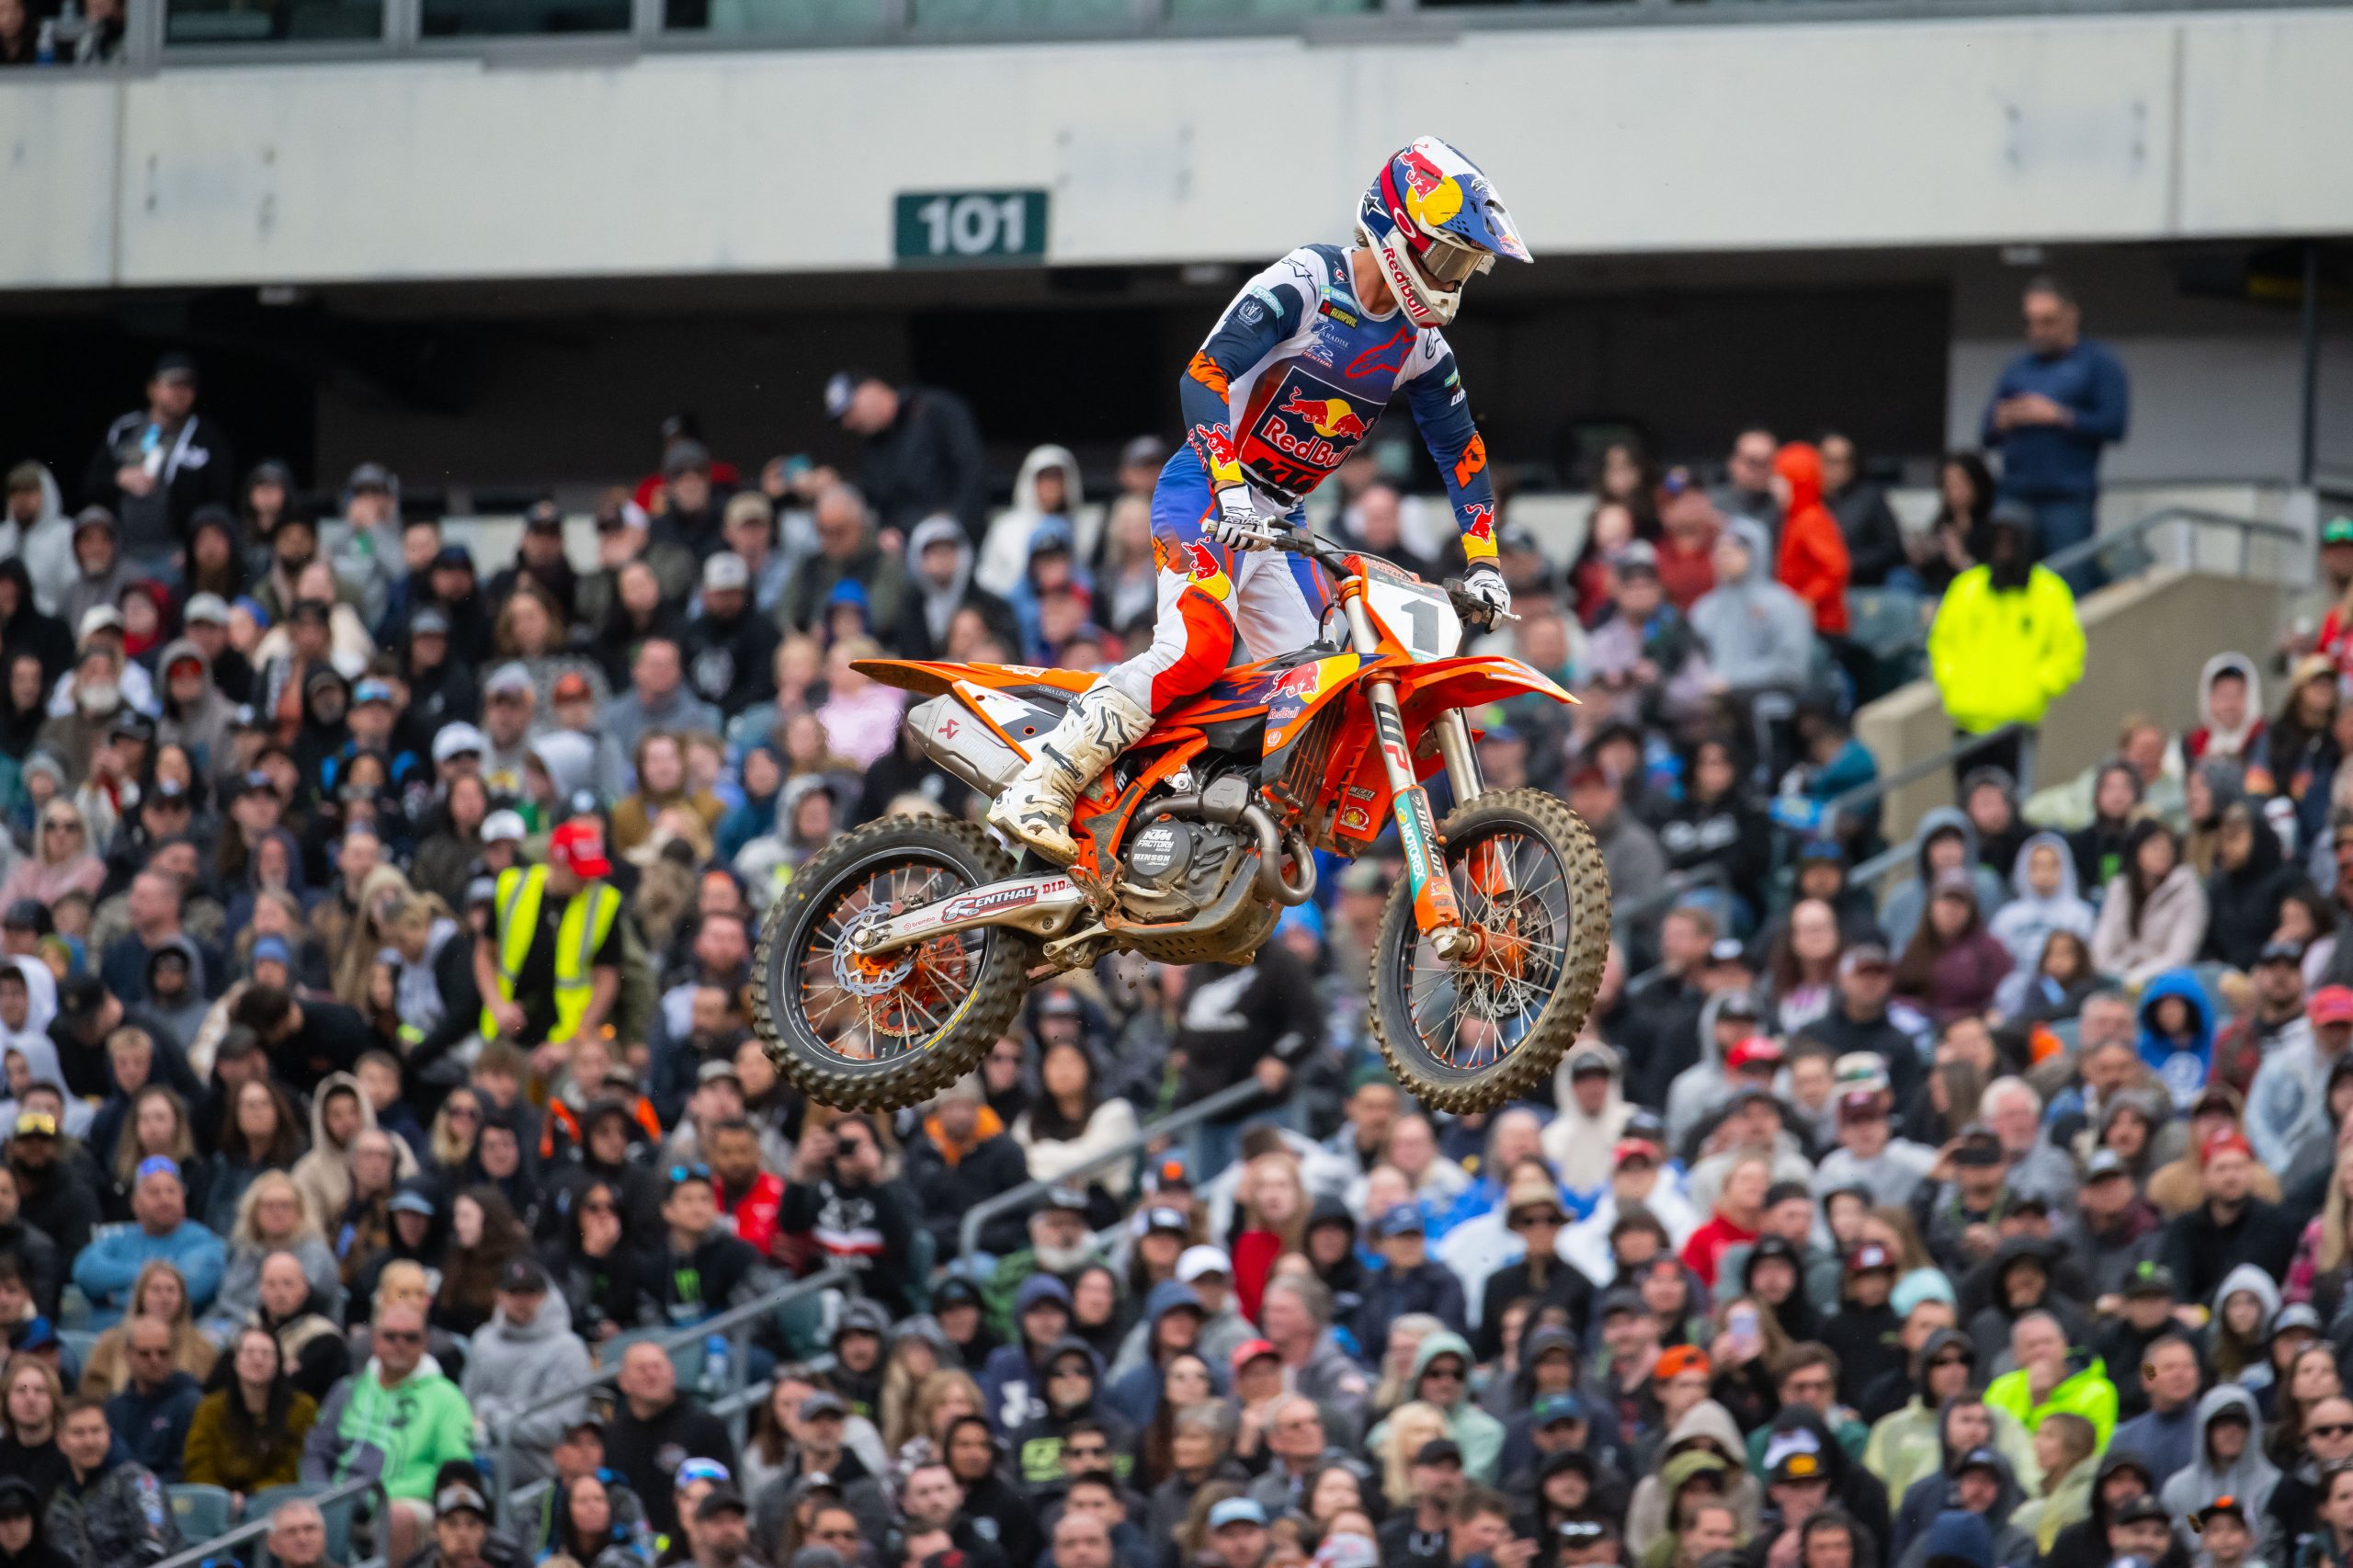 Chase Sexton and Tom Vialle charge to second in Philadelphia Supercross